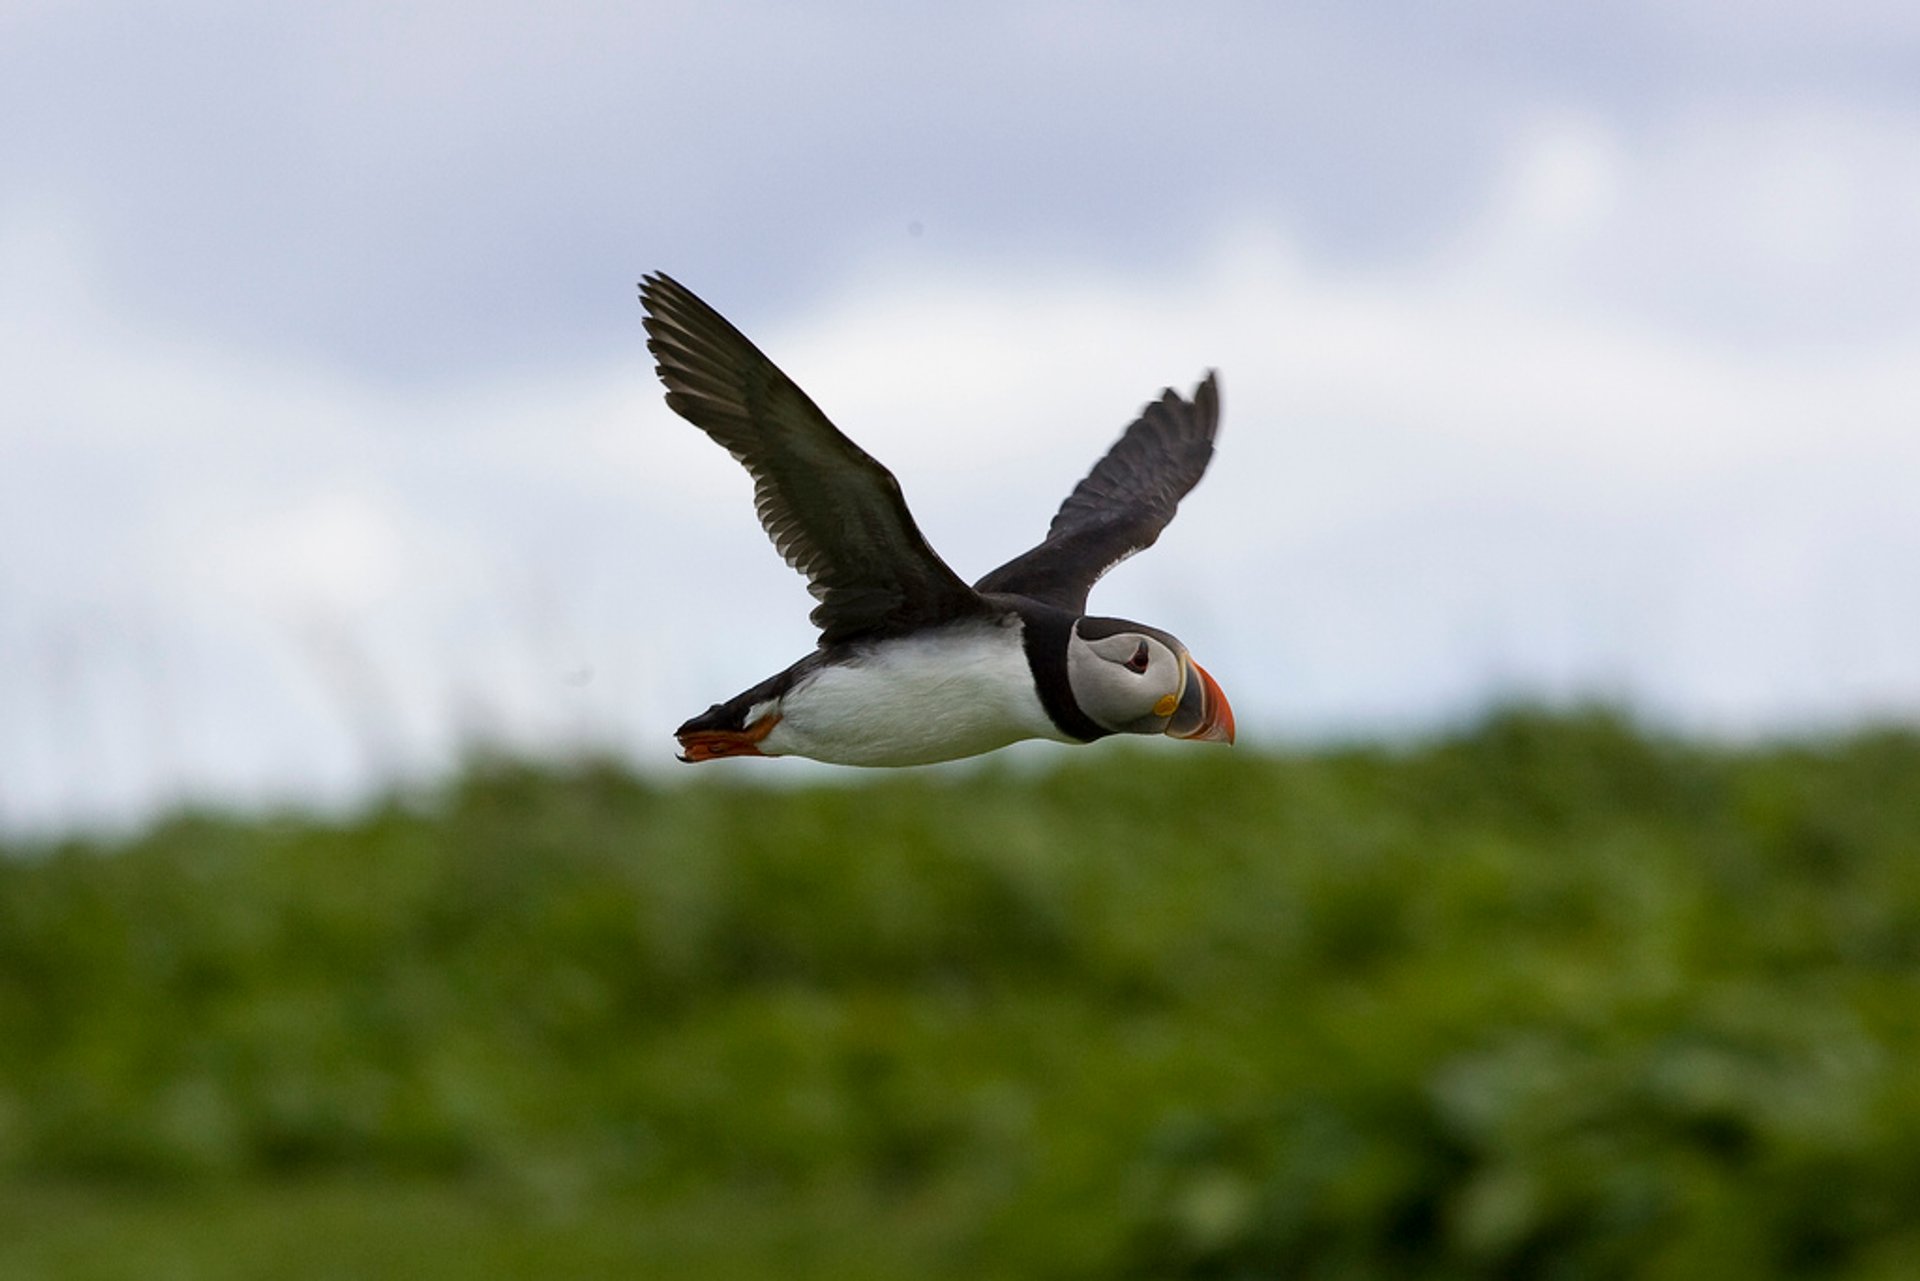 Puffins on the Farne Islands